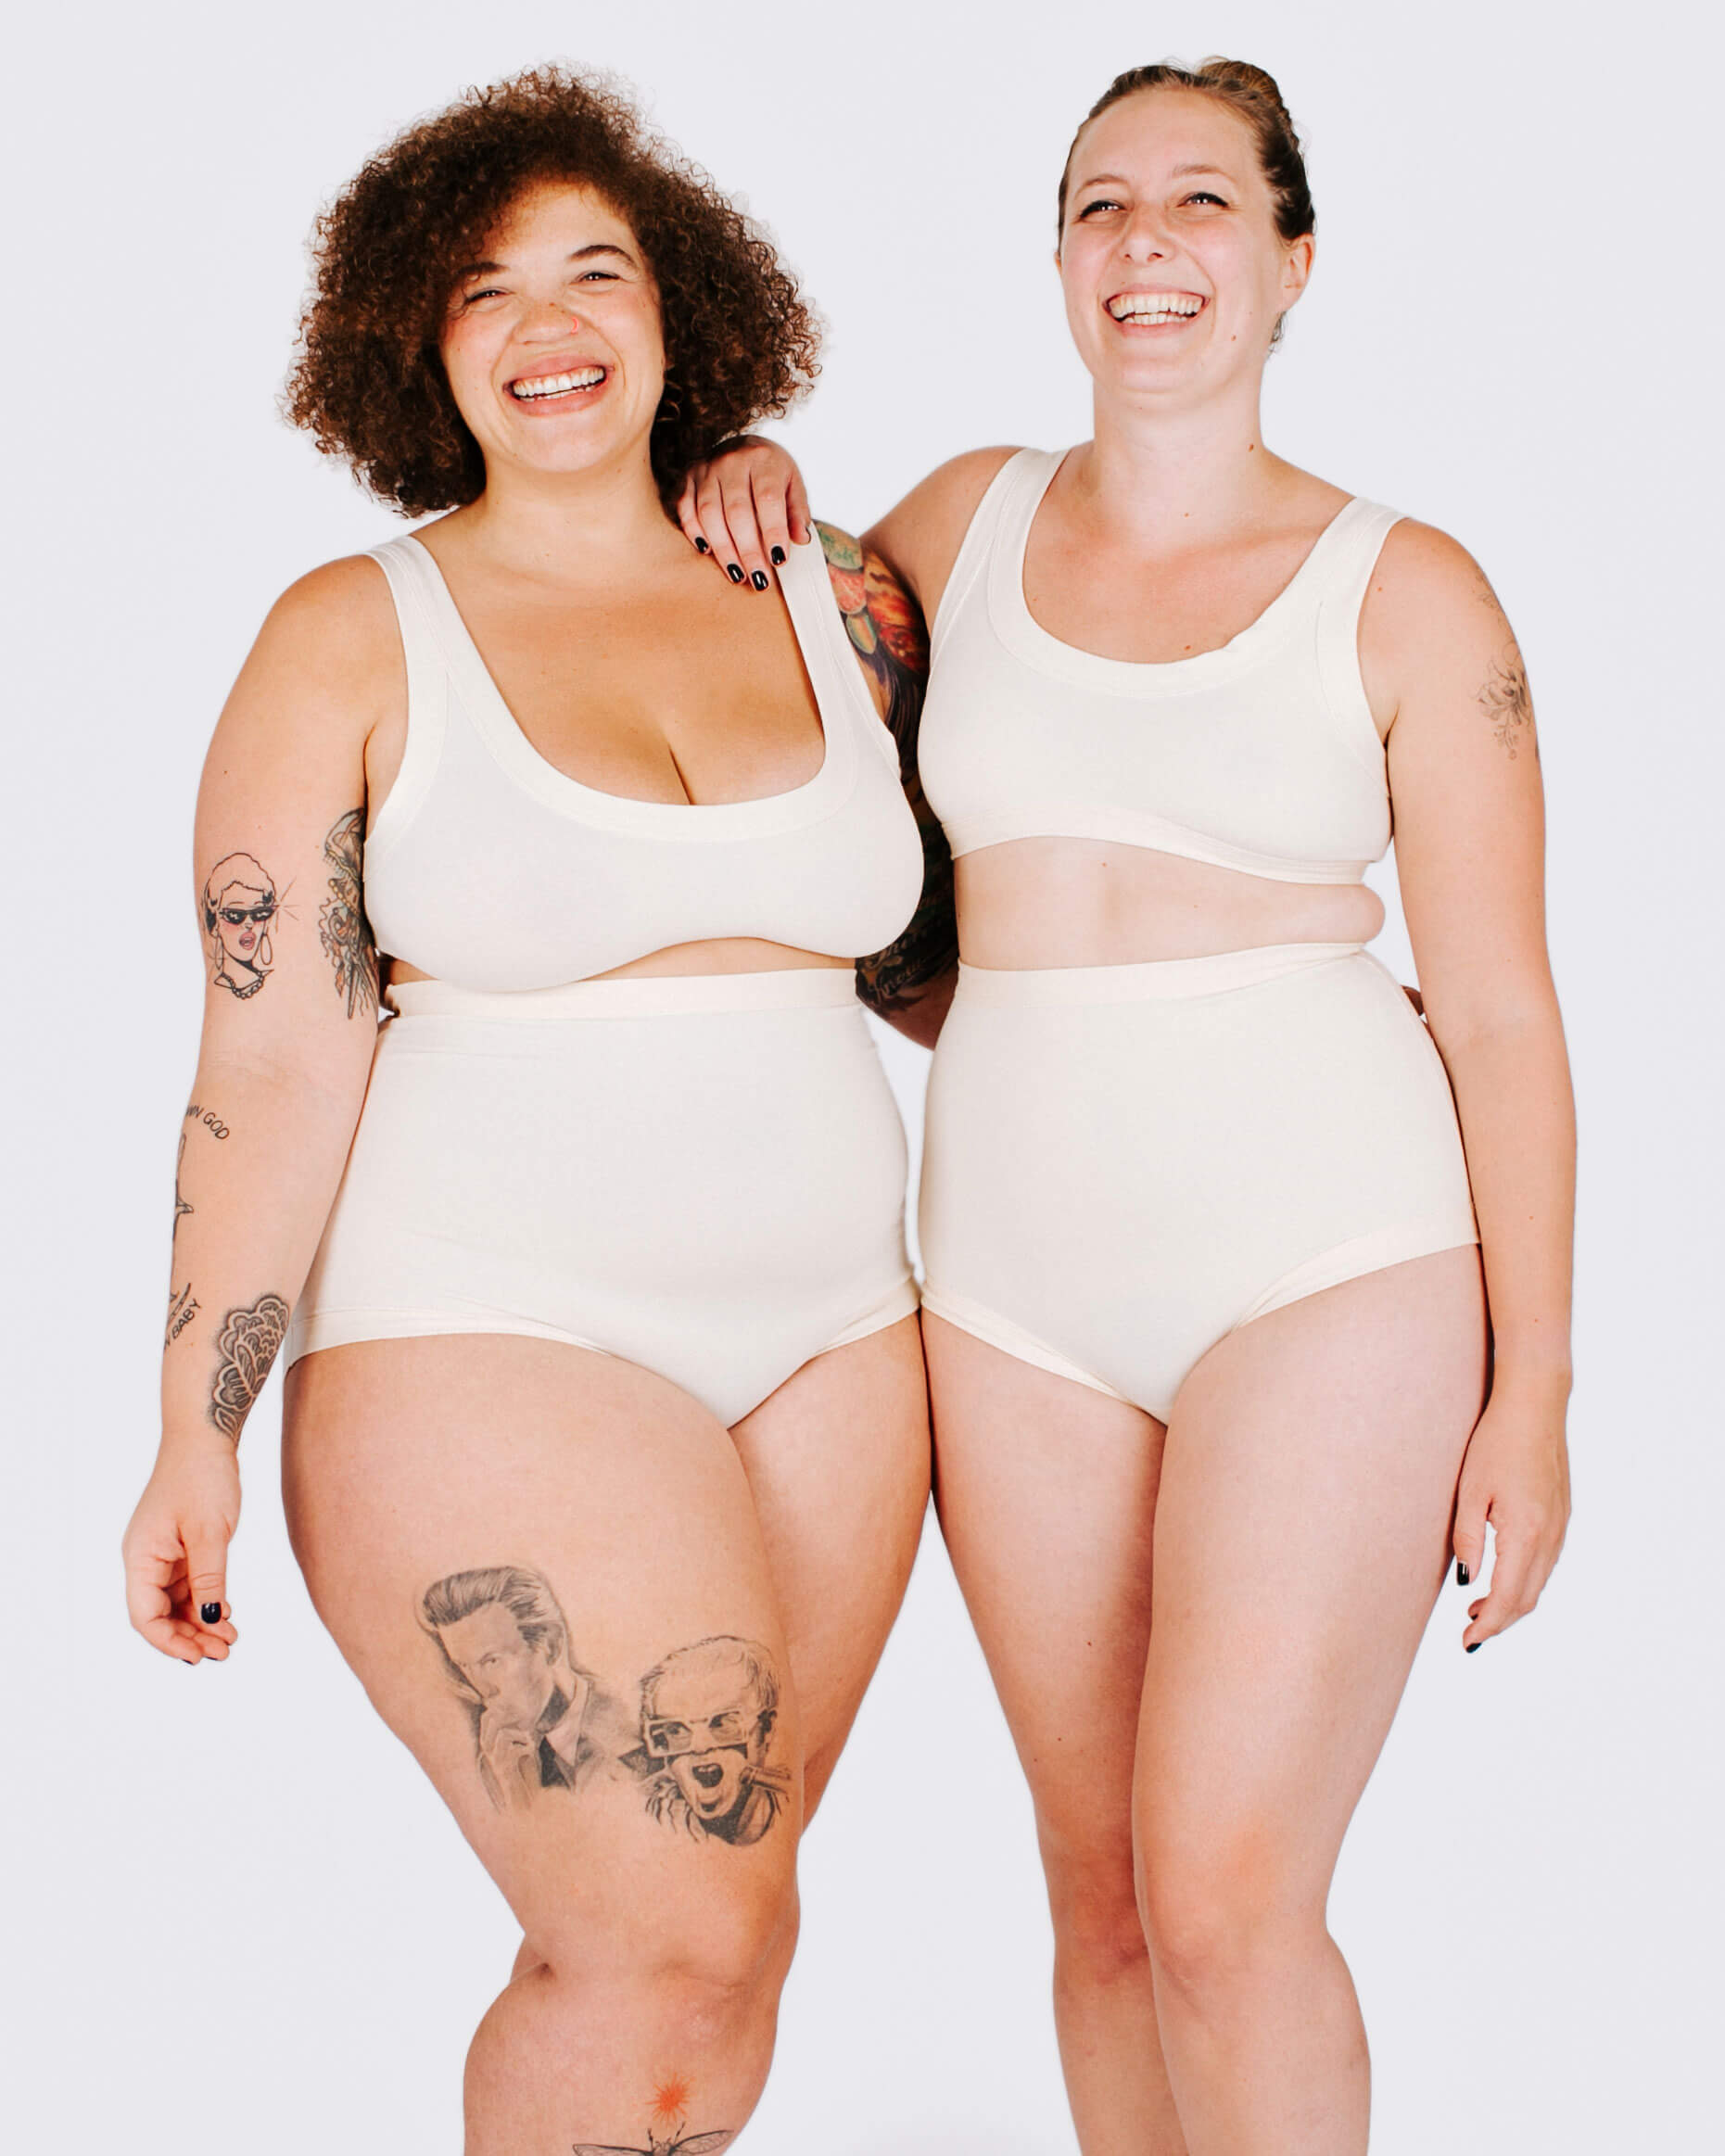 Fit photo from the front of Thunderpants organic cotton Sky Rise style underwear and Bralette in off-white on two models standing together.